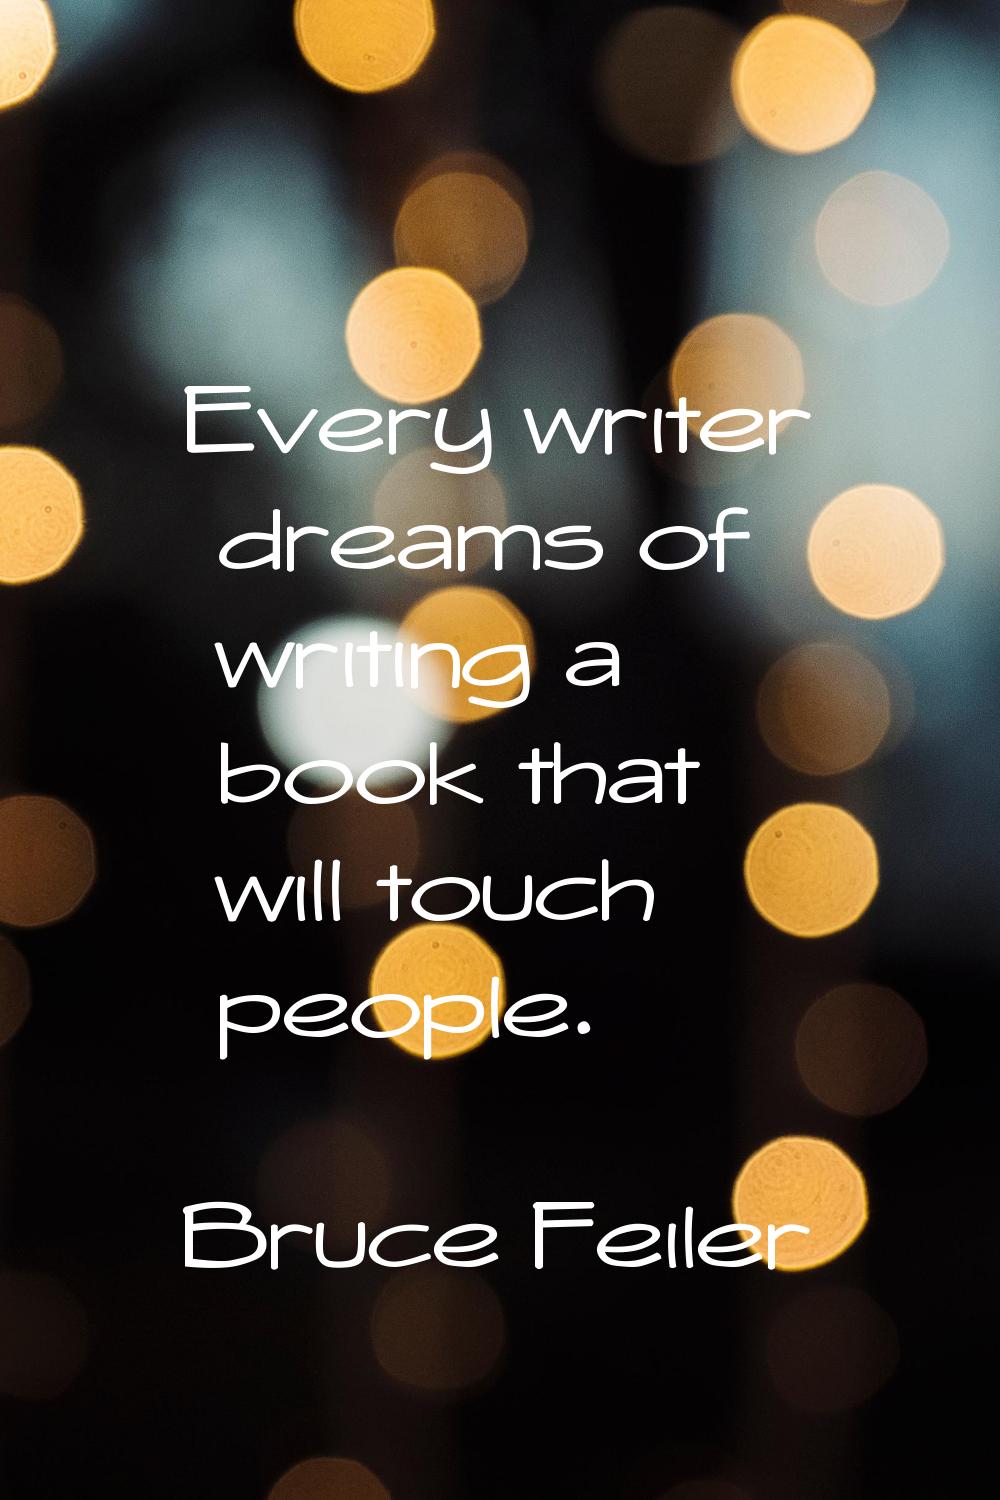 Every writer dreams of writing a book that will touch people.